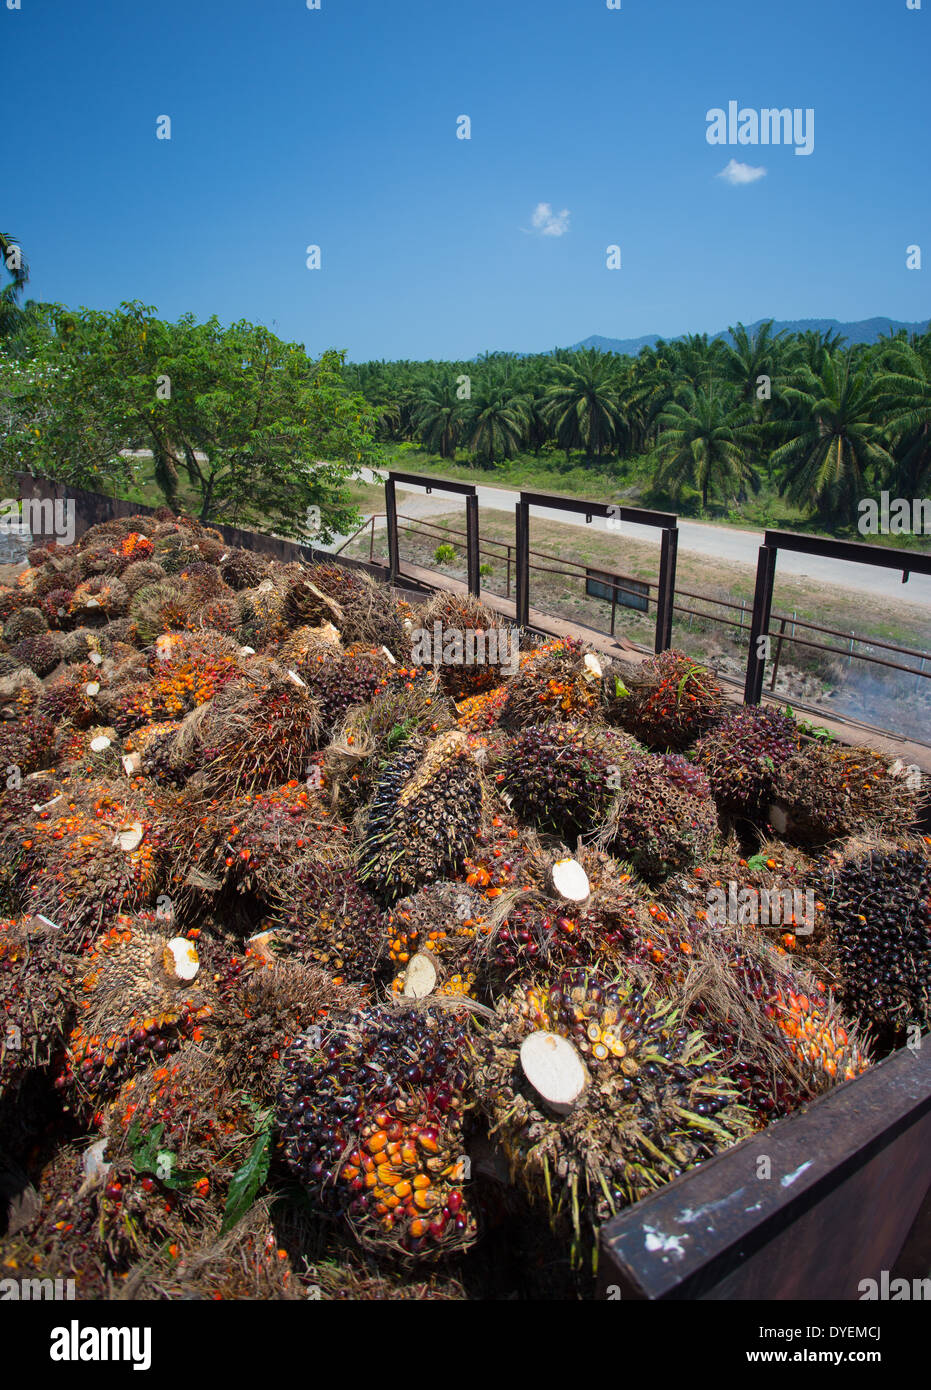 Red fruits of the Oil Palm (Elaeis guineensis) collected for processing & refinement into palm oil, Pahang, Malaysia Stock Photo